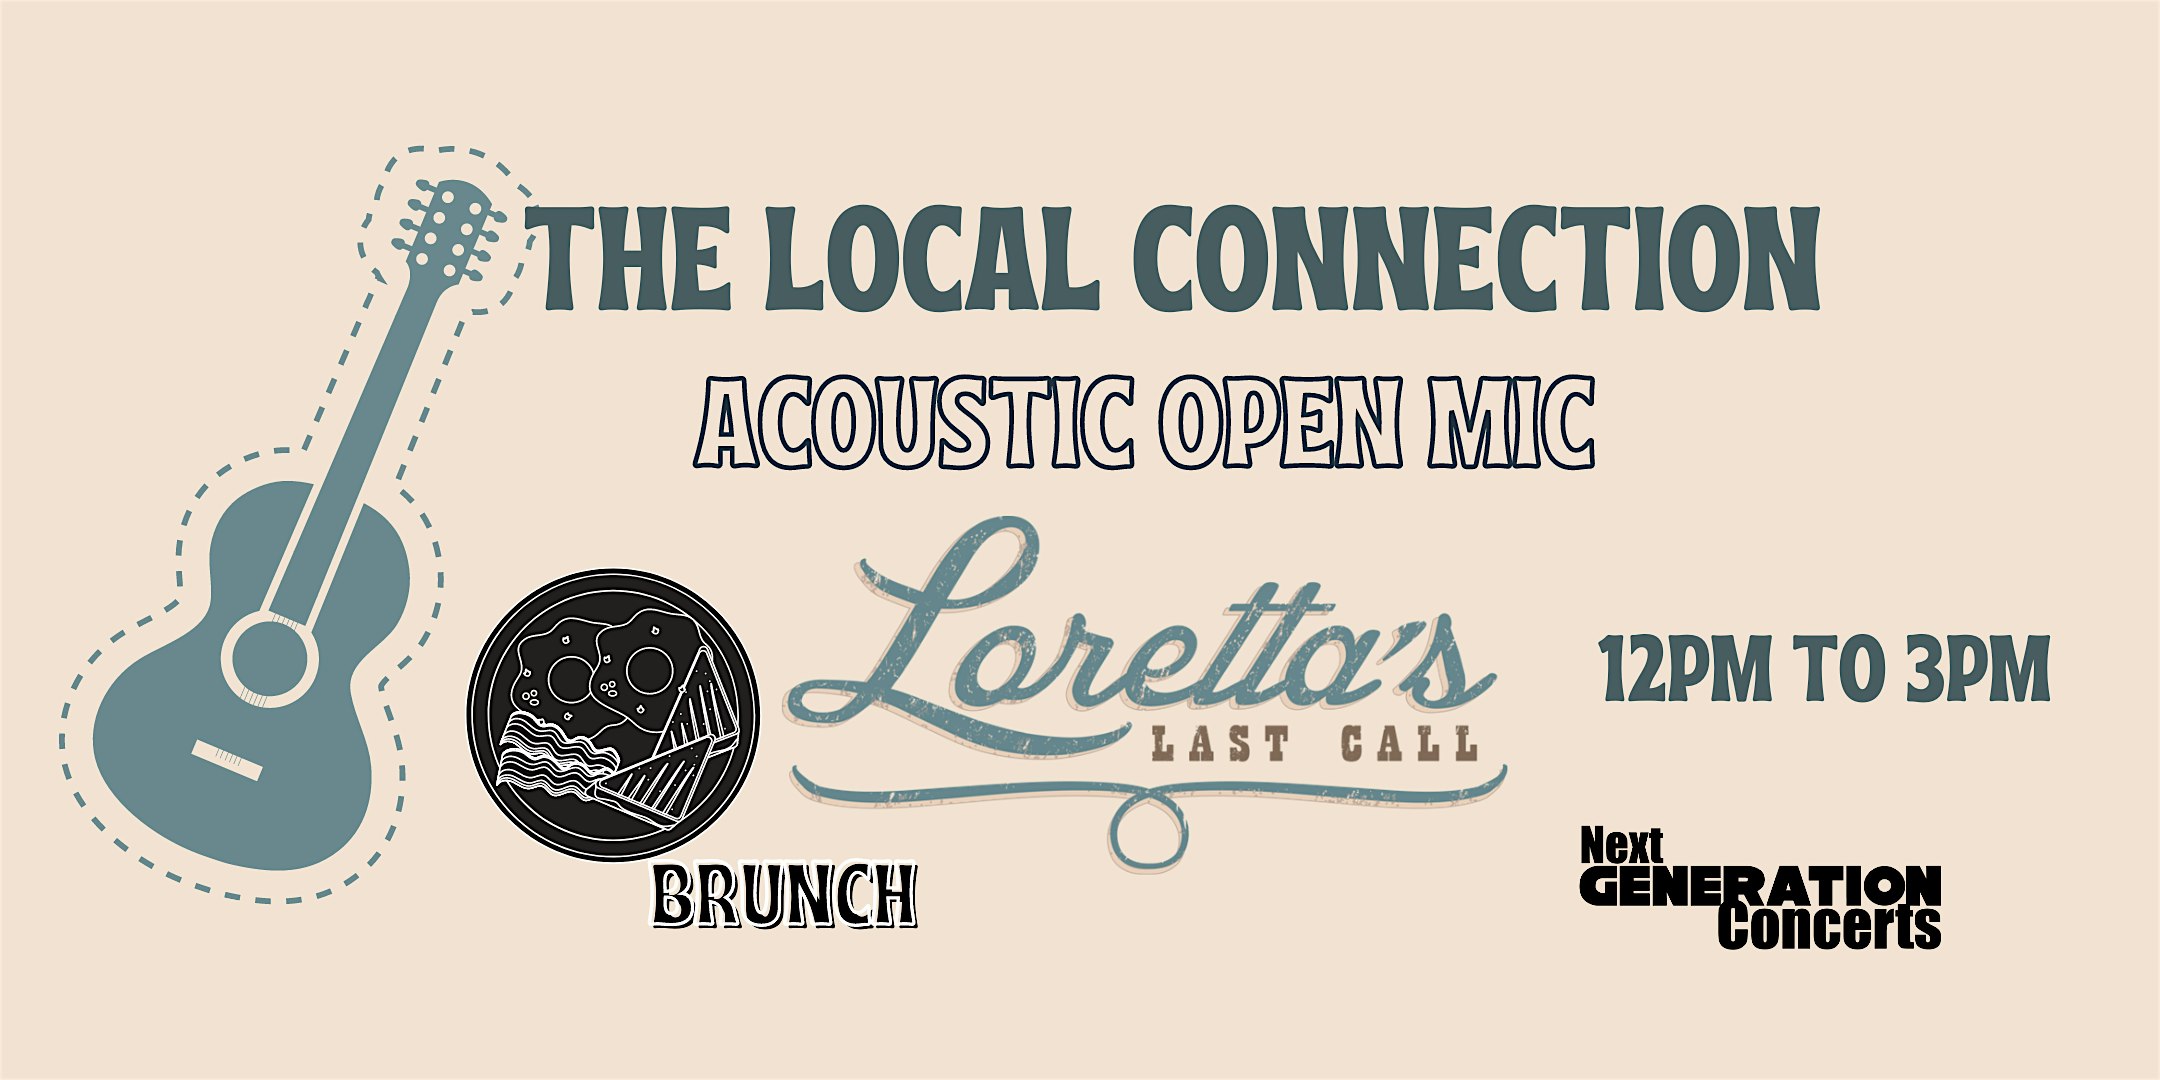 The Local Connection: Acoustic Open Mic